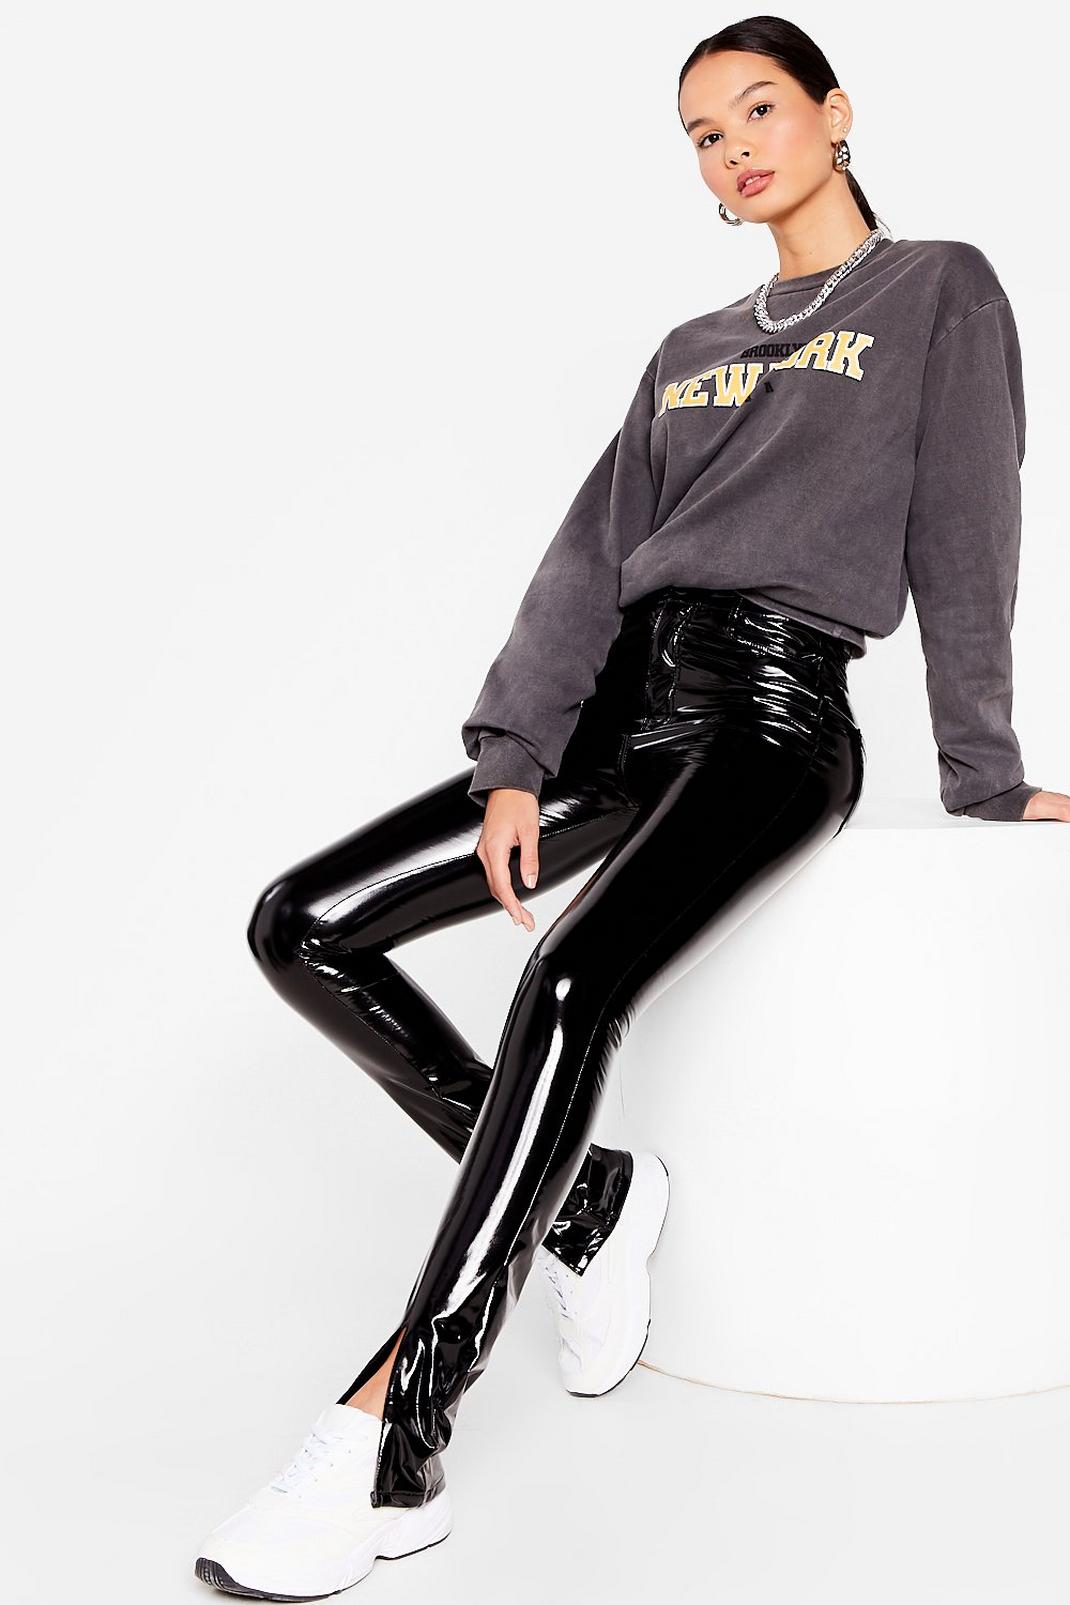 Make It to the Vinyl High-Waisted Slit Pants